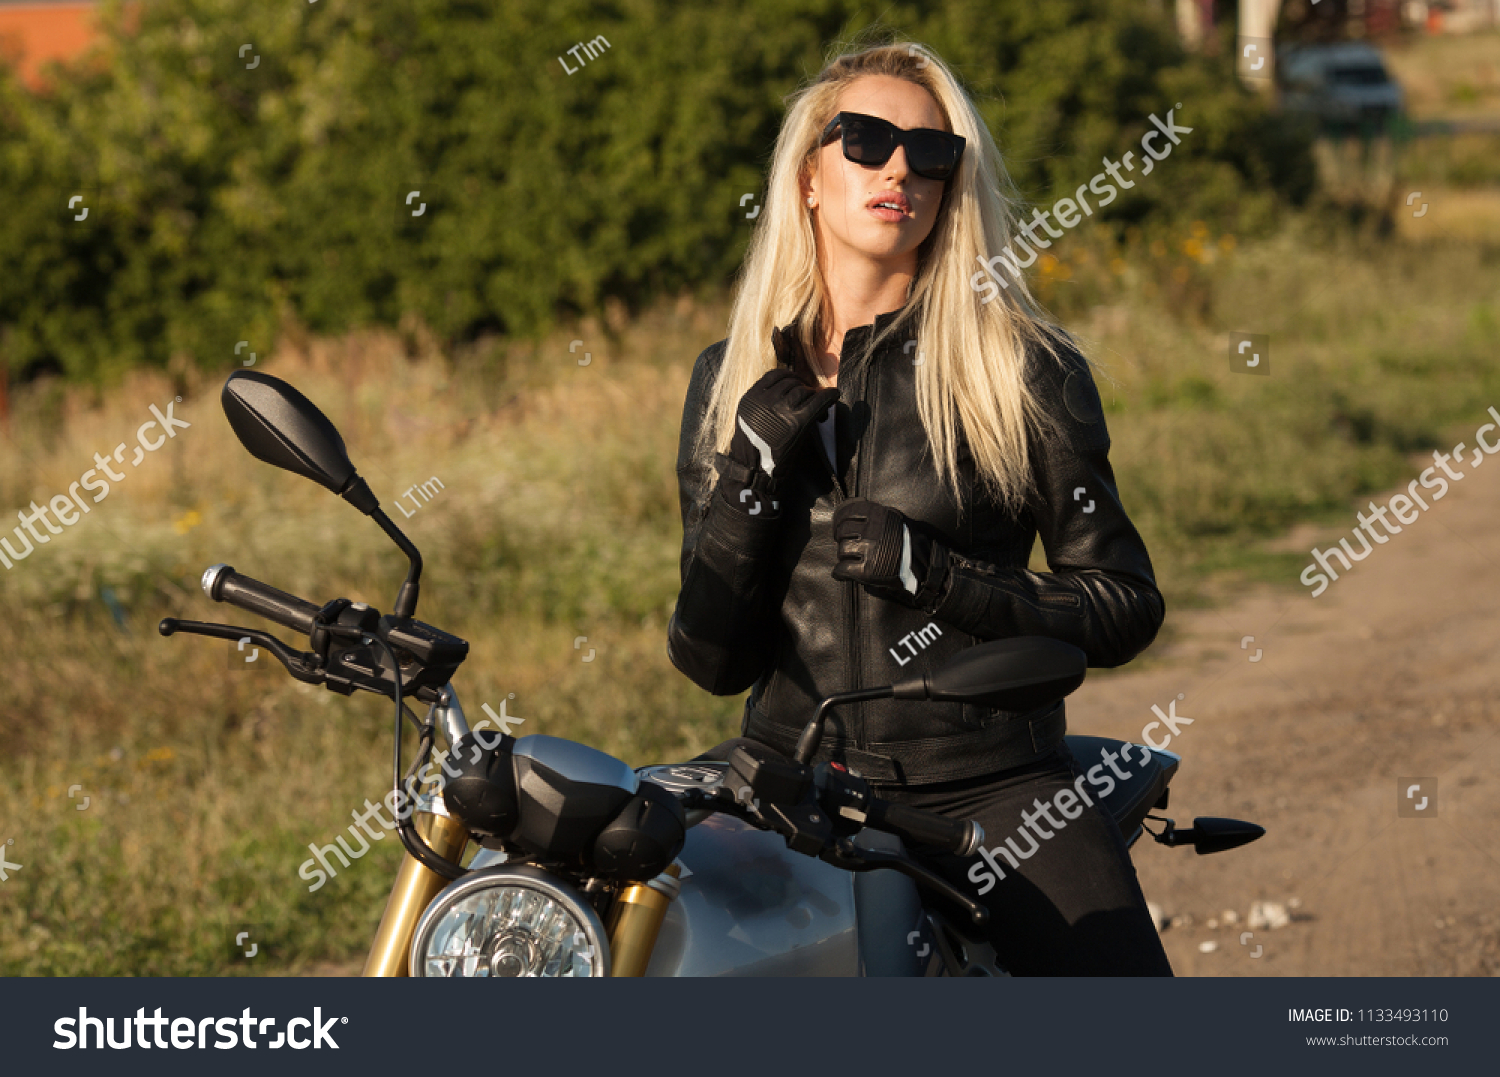 brenden muller recommends pictures of biker woman pic